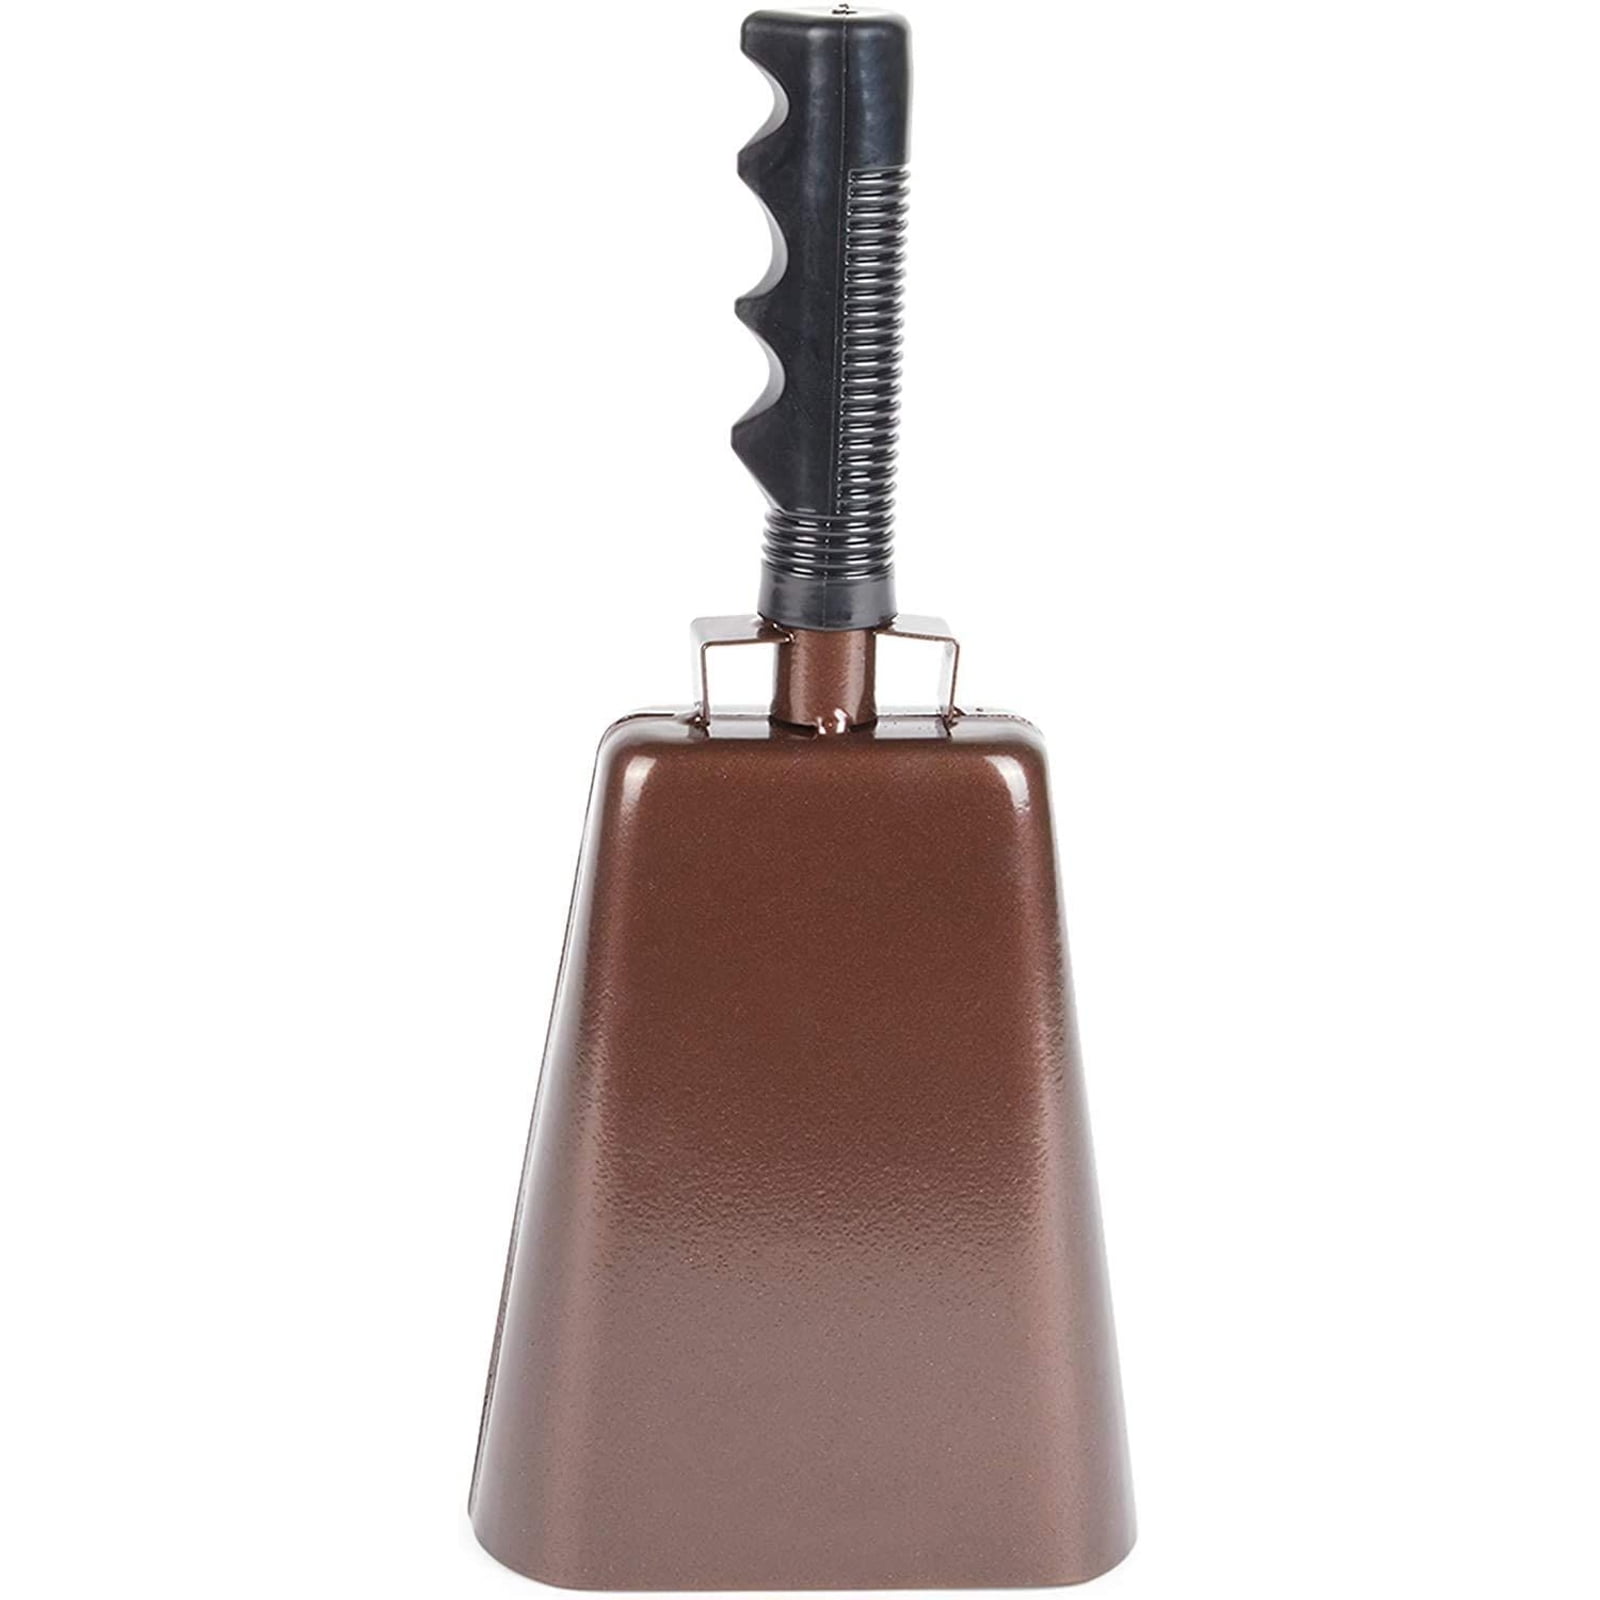 Cowbells Classroom Use Weddings Cow Bell Set Blue 3 x 2.8 x 2.49 inches Noisemaker Call Bells for Football Games 12-Count Loud Bells with Handles 